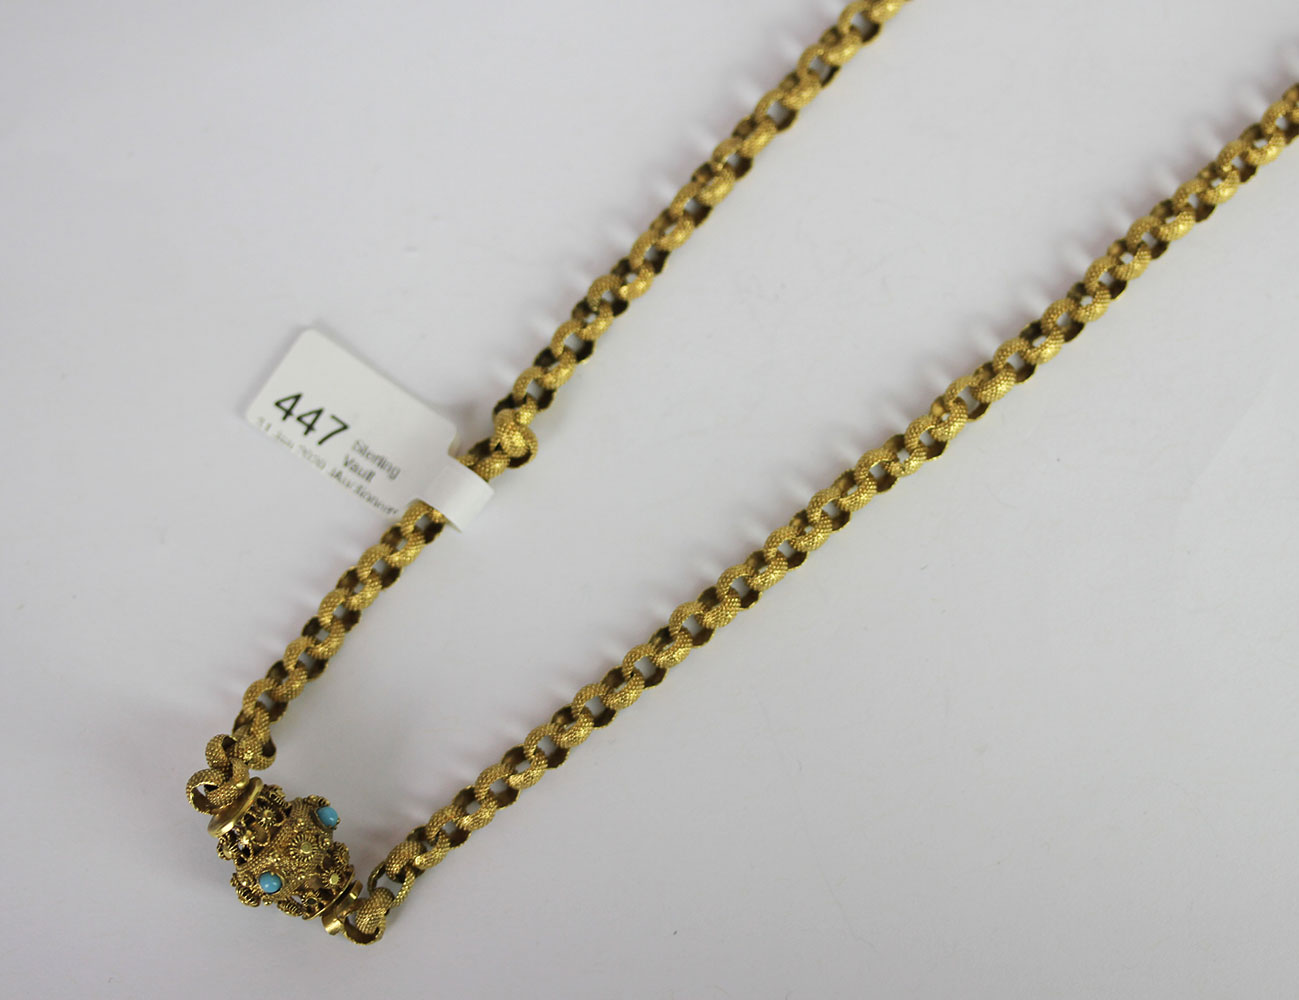 Georgian guard chain, belcher link chai, 4.7mm textured bead links, matching clasp set with - Image 2 of 3